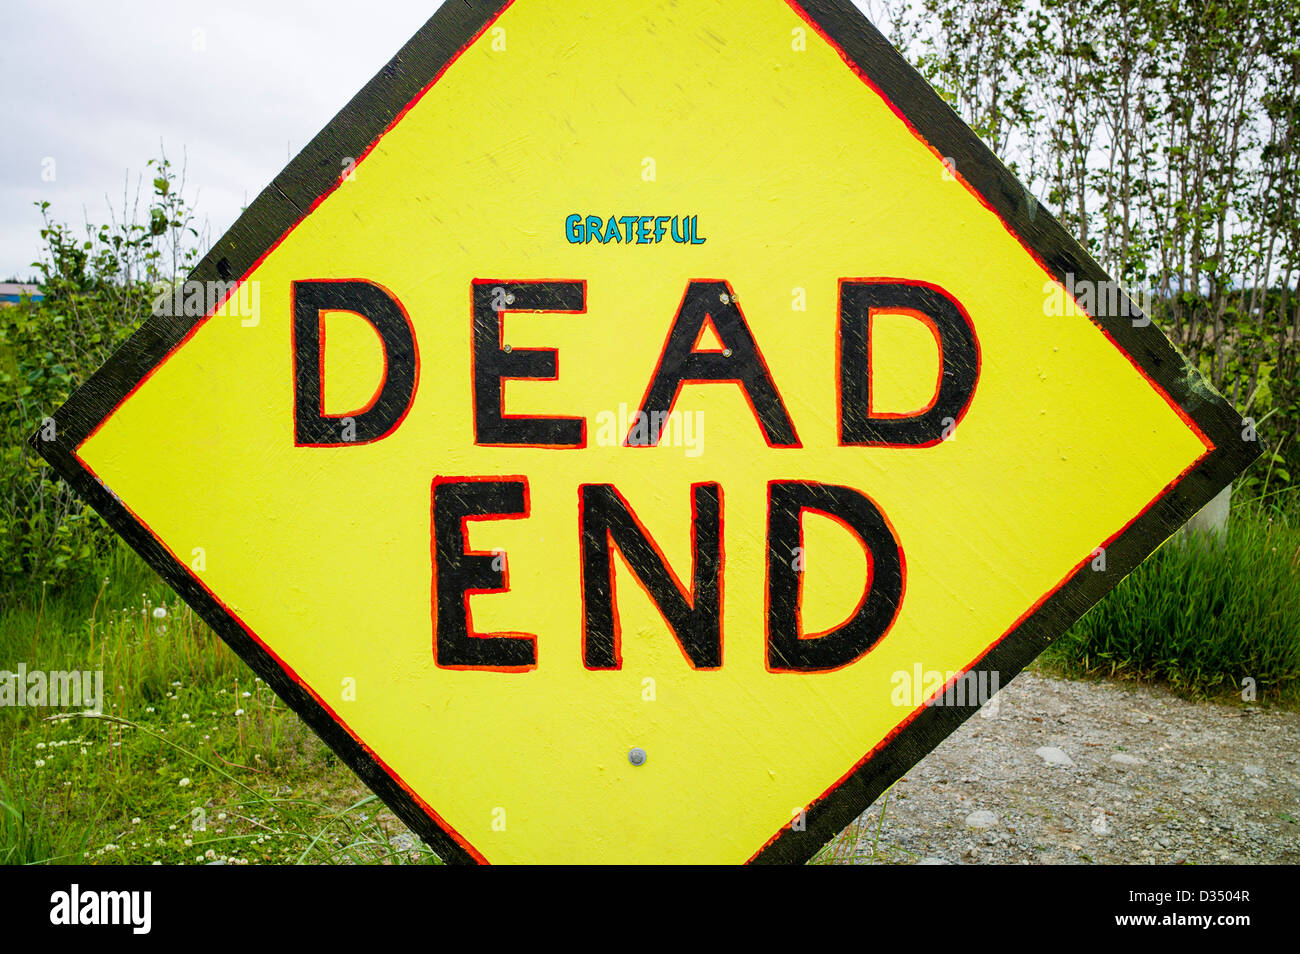 Humorous addition to road sign 'Grateful - Dead End', Homer, Alaska, USA Stock Photo